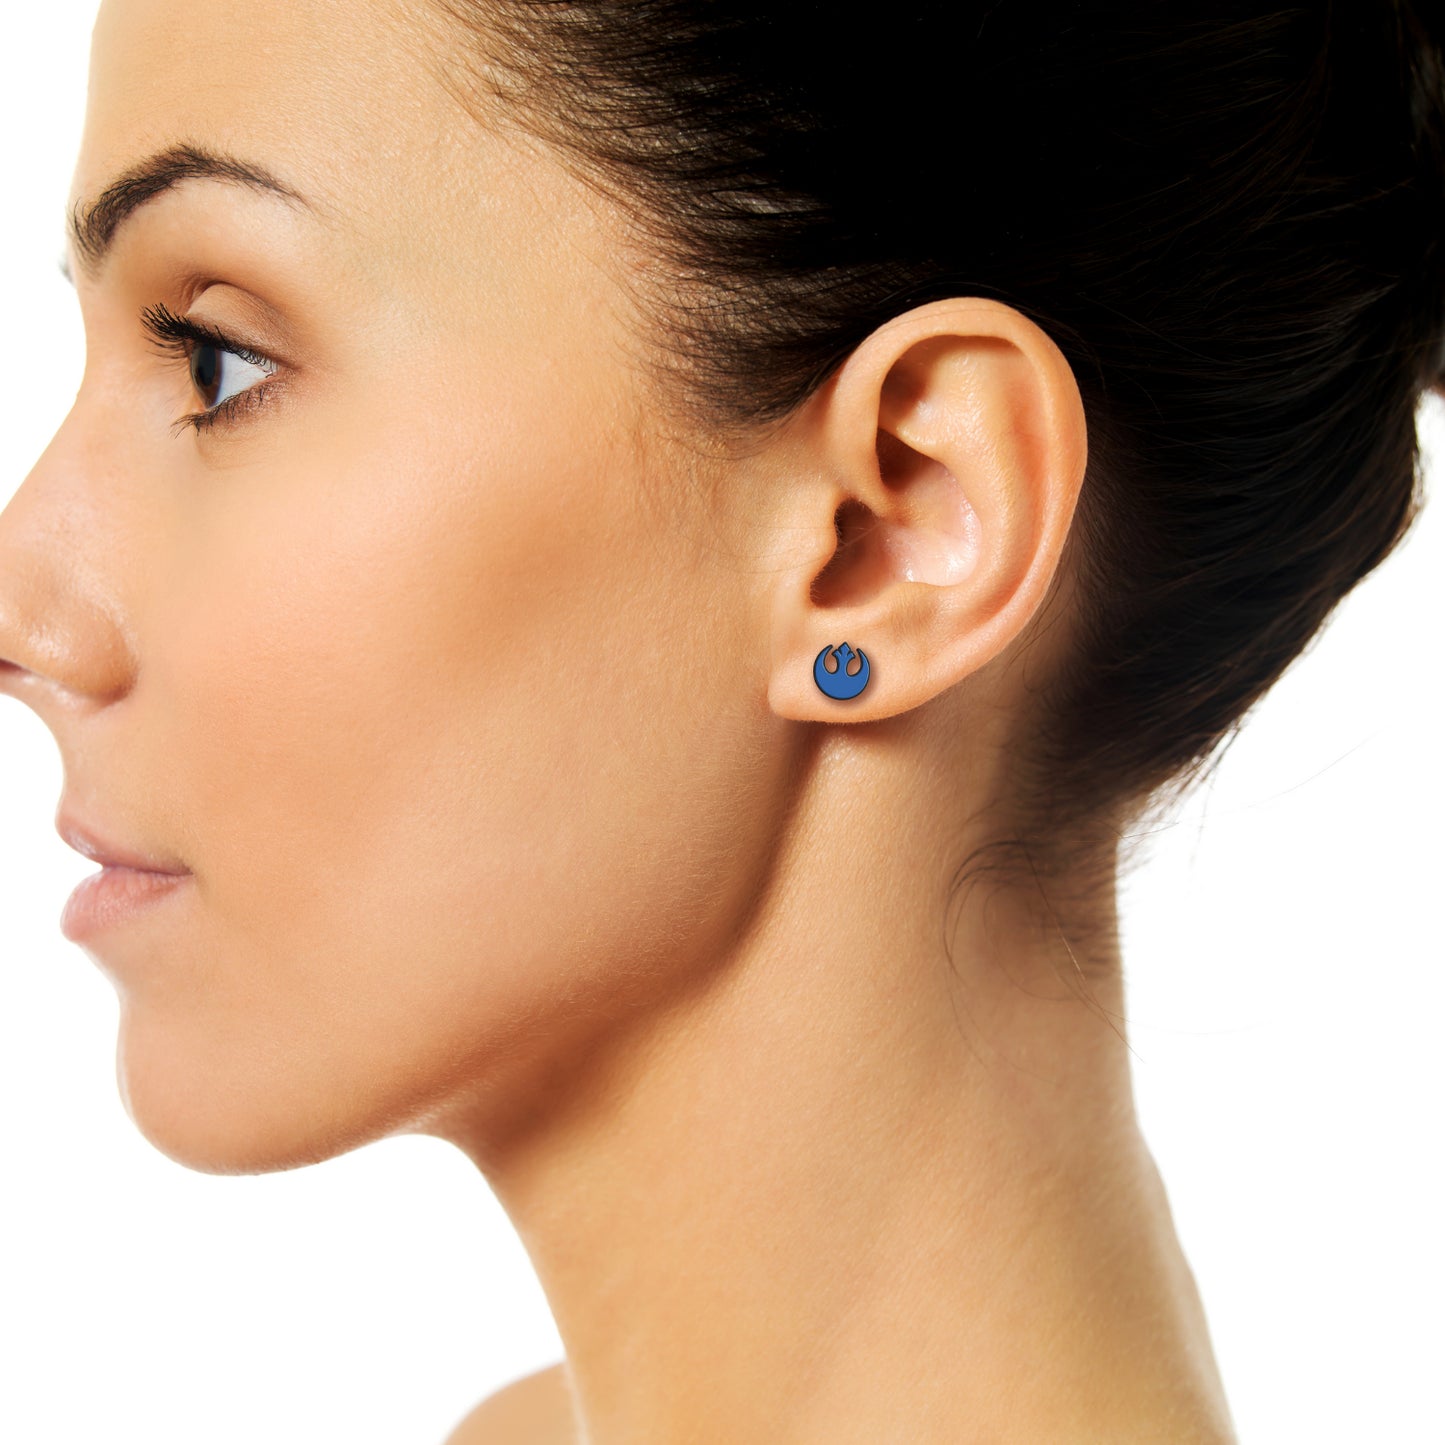 A woman with dark brown hair wearing an earring featuring the rebel icon from Star Wars